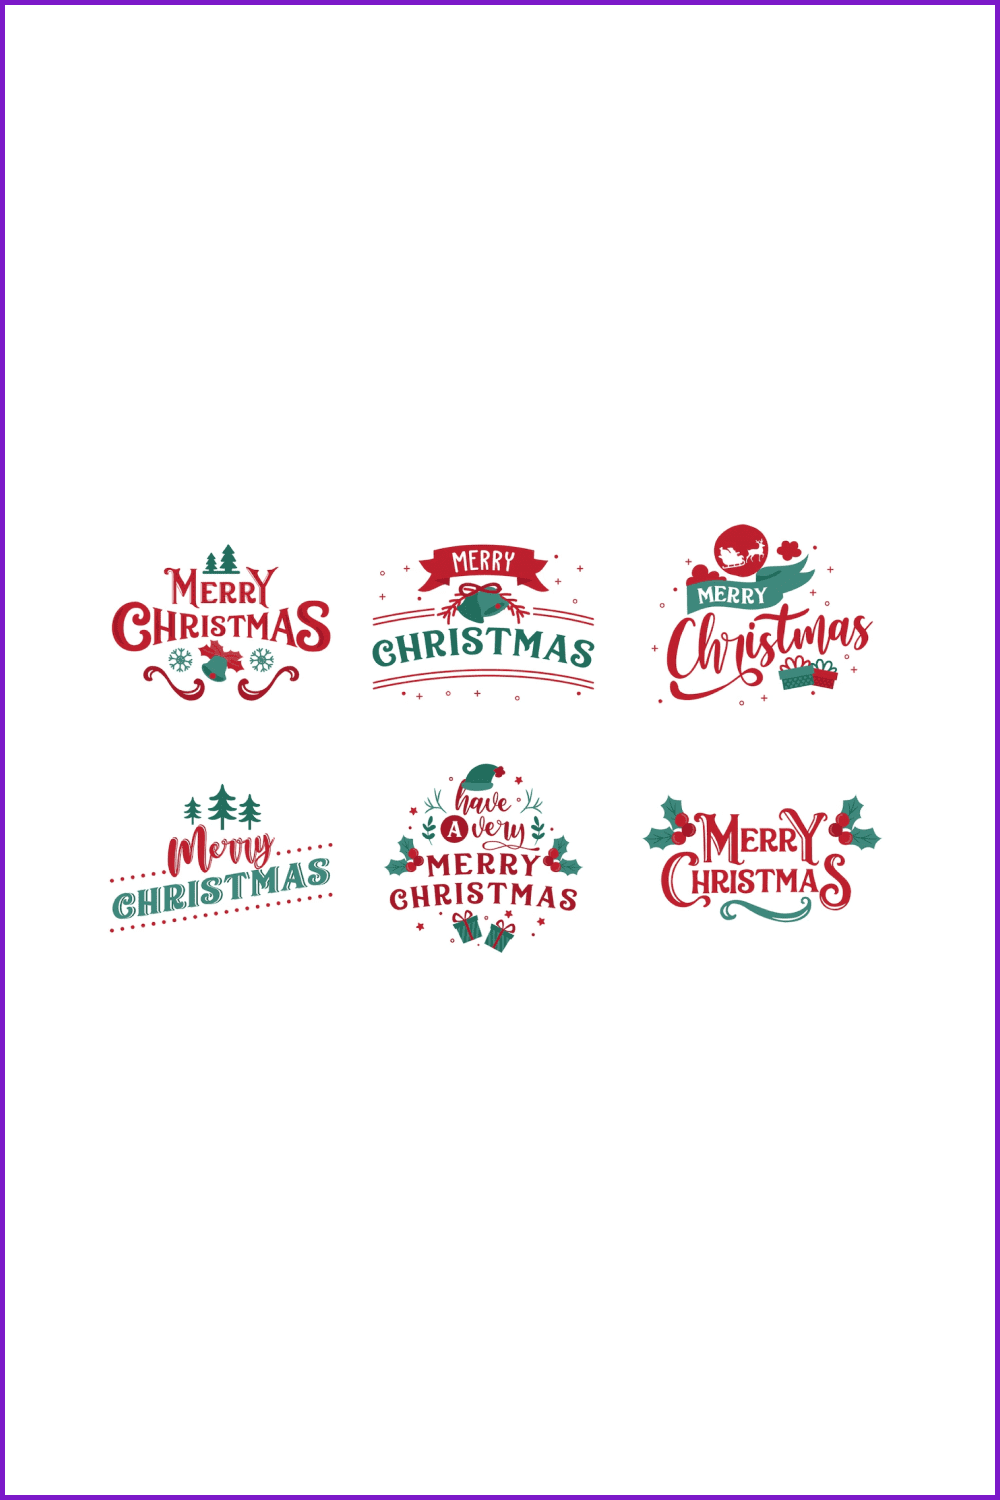 6 badges with red and green wishes Merry Christmas.